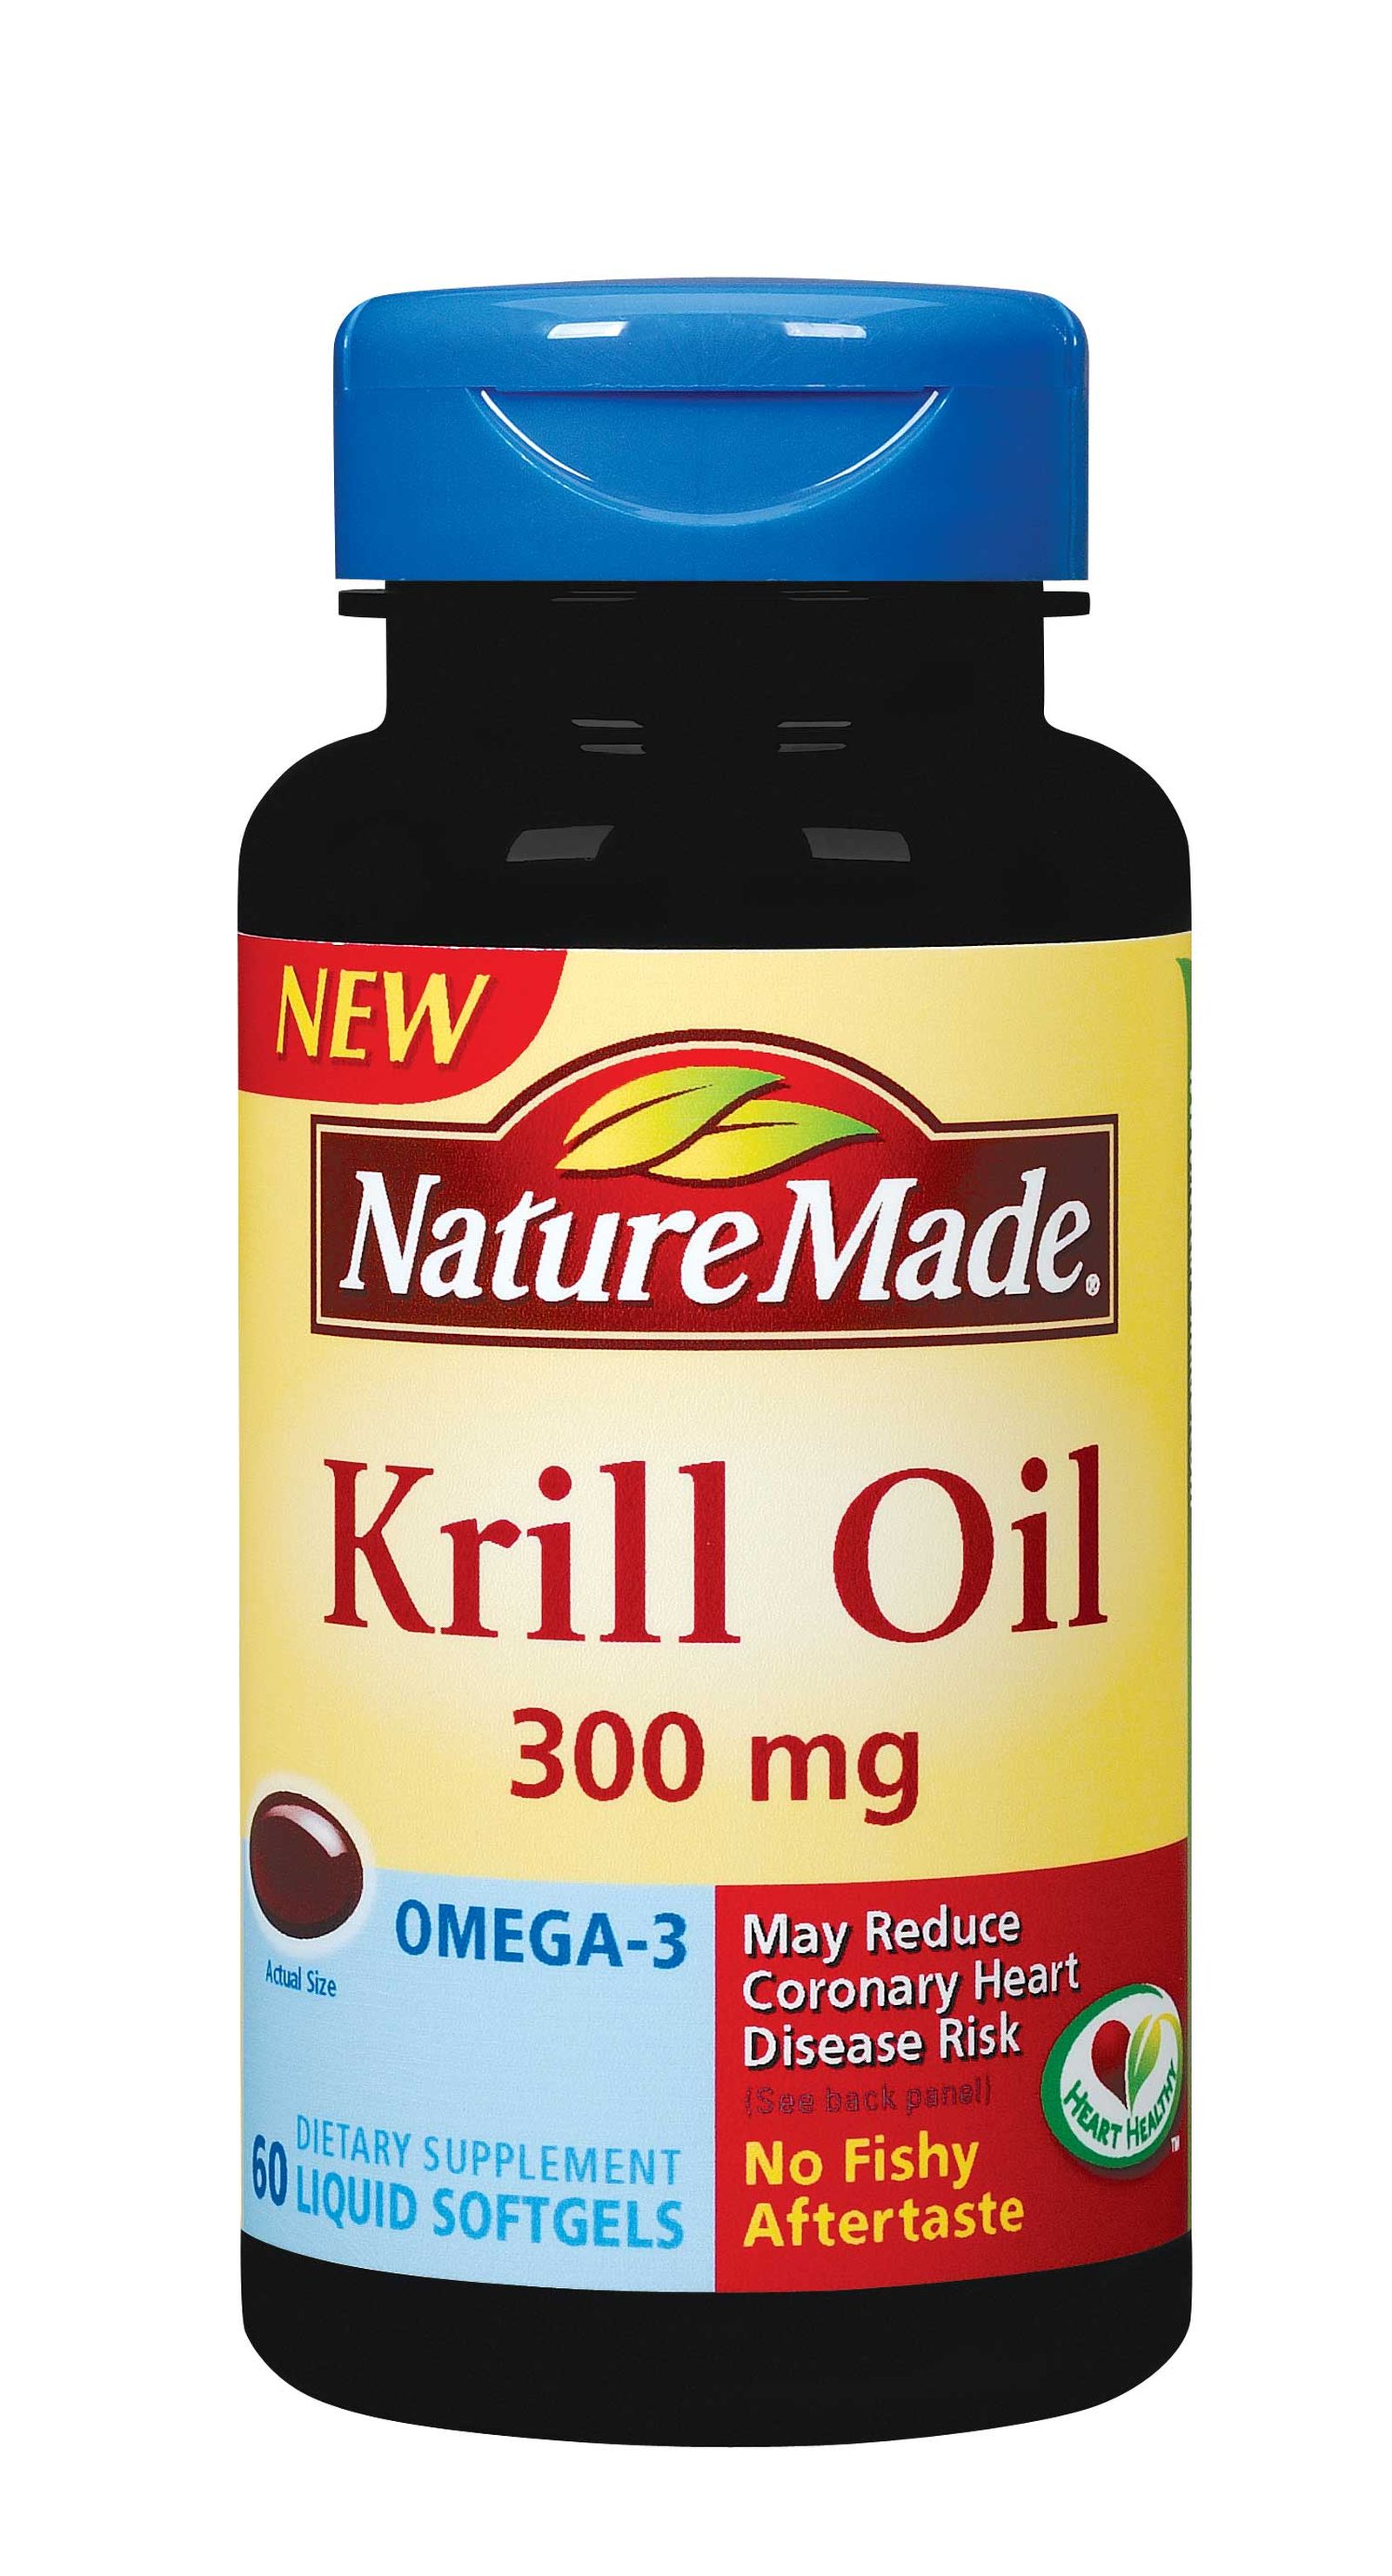 Nature Made Krill Oil 300 mg, 60 Softgels